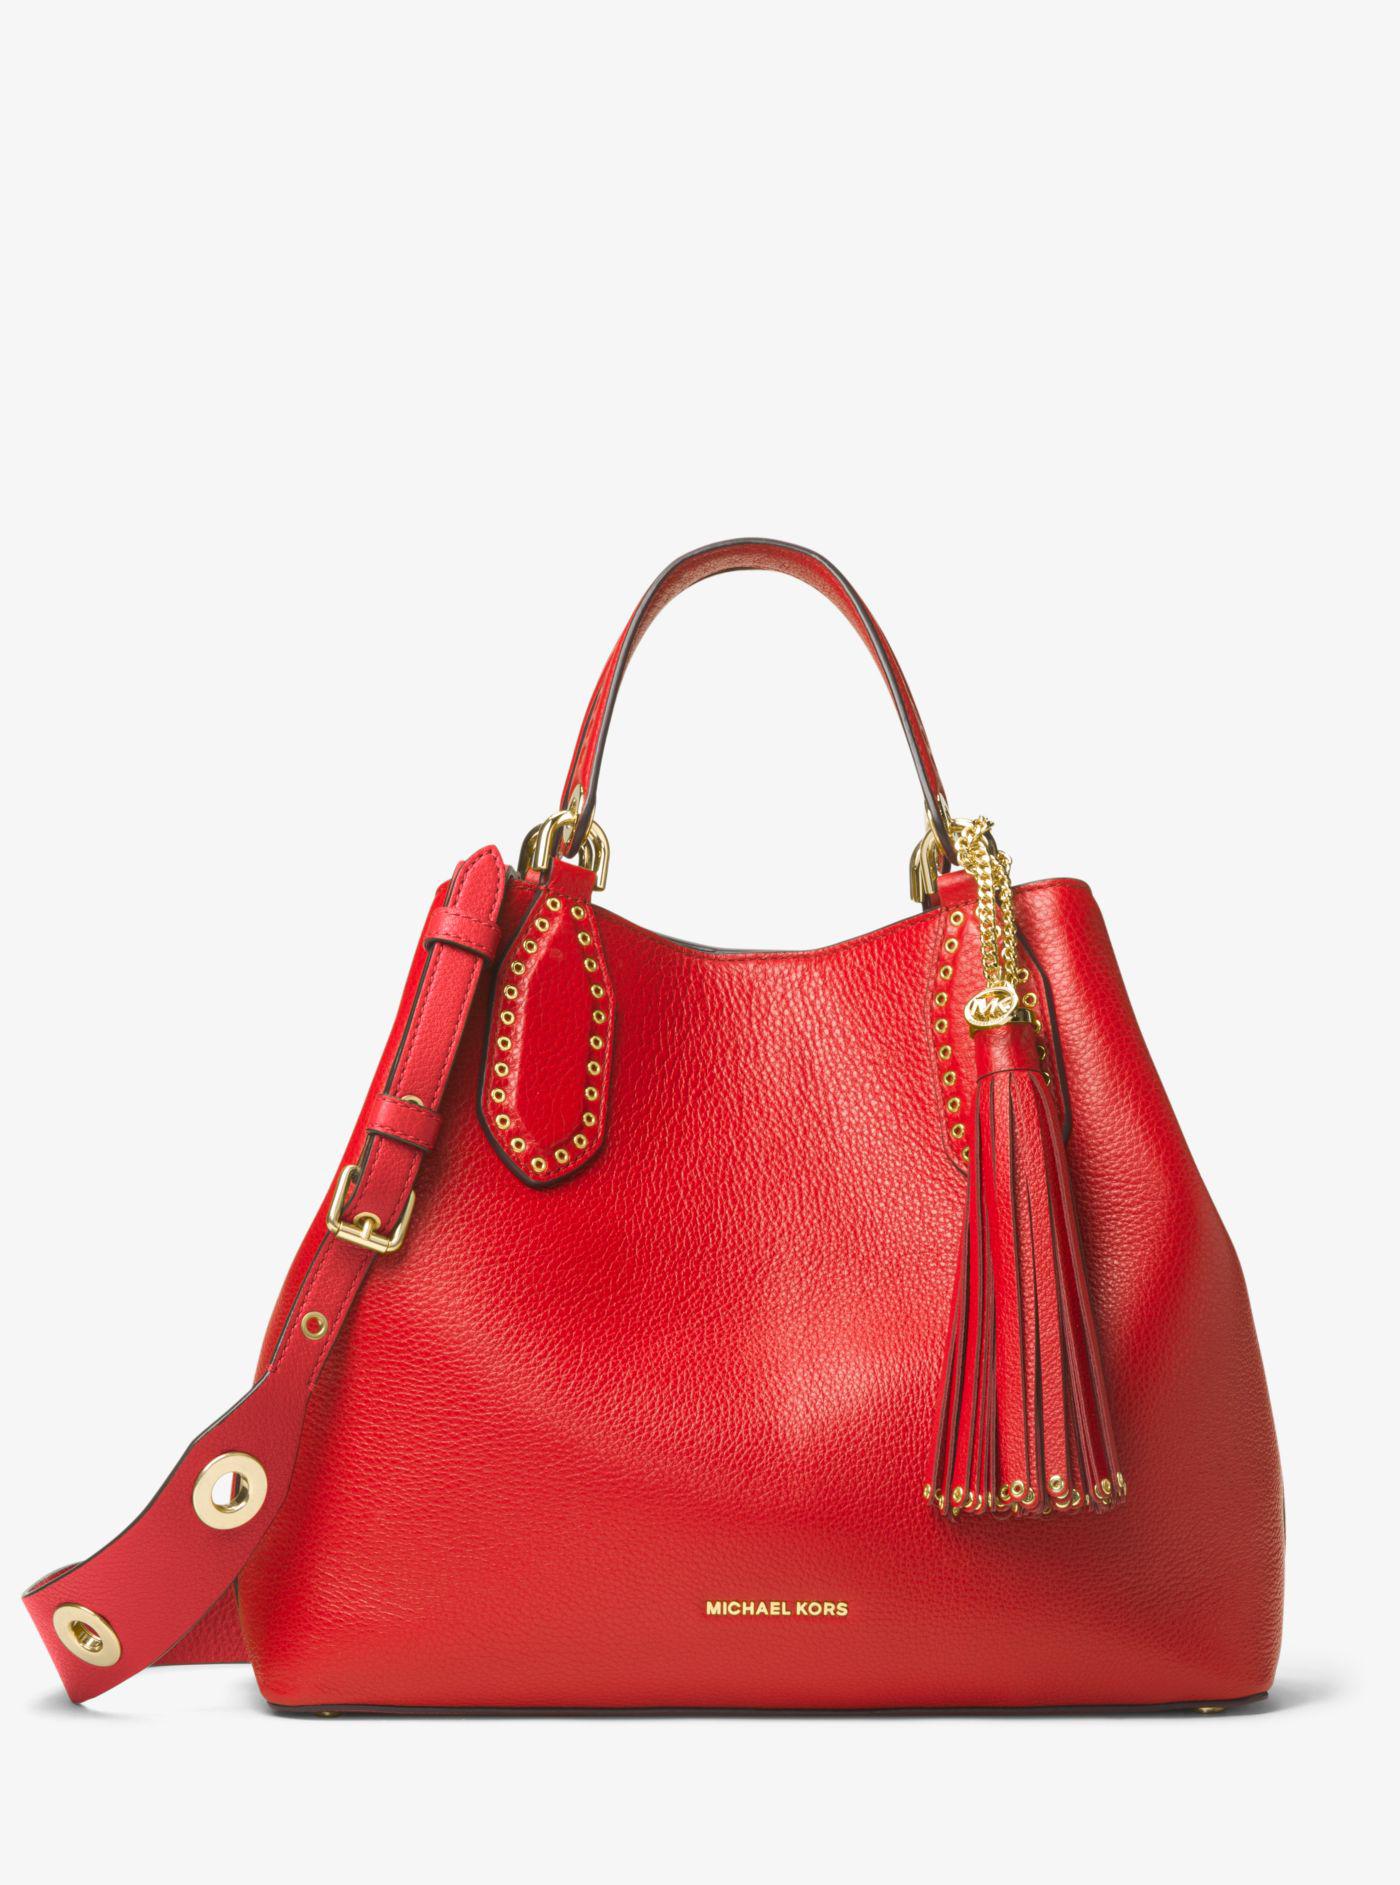 Michael Kors Brooklyn Large Leather Satchel in Red | Lyst